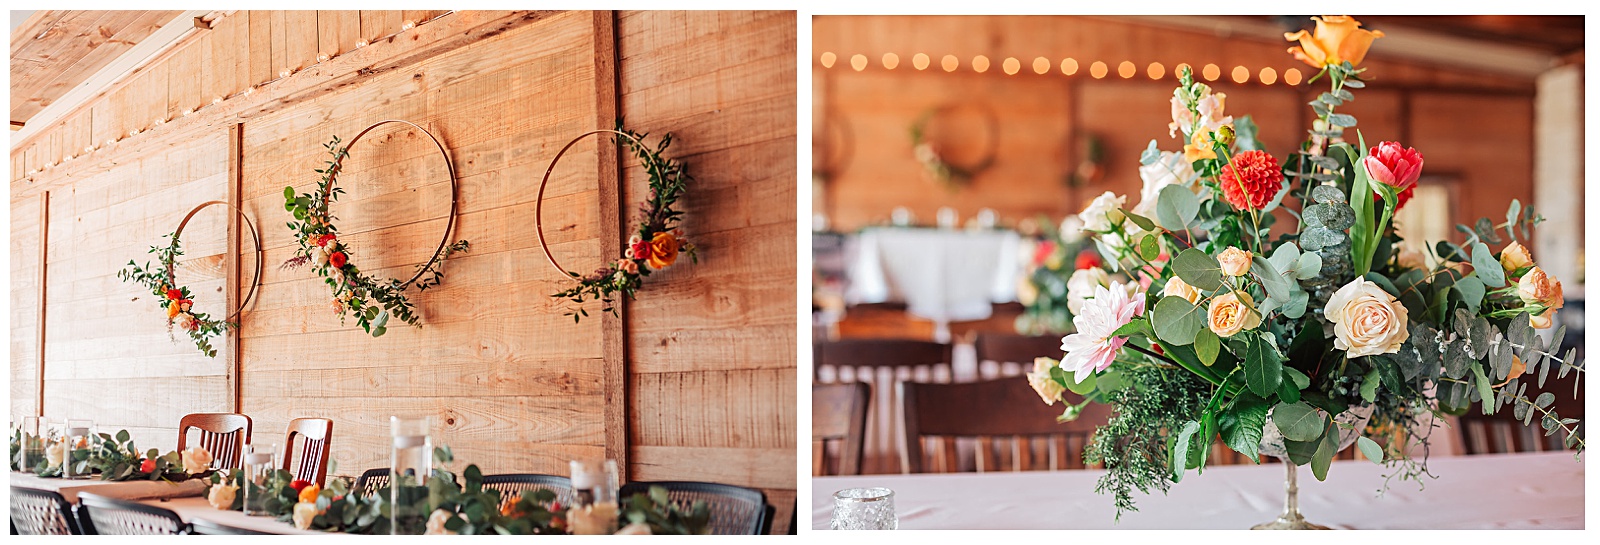 Simple and sweet modern Boho style decor at rustic chic winery wedding venue in Bellville, TX